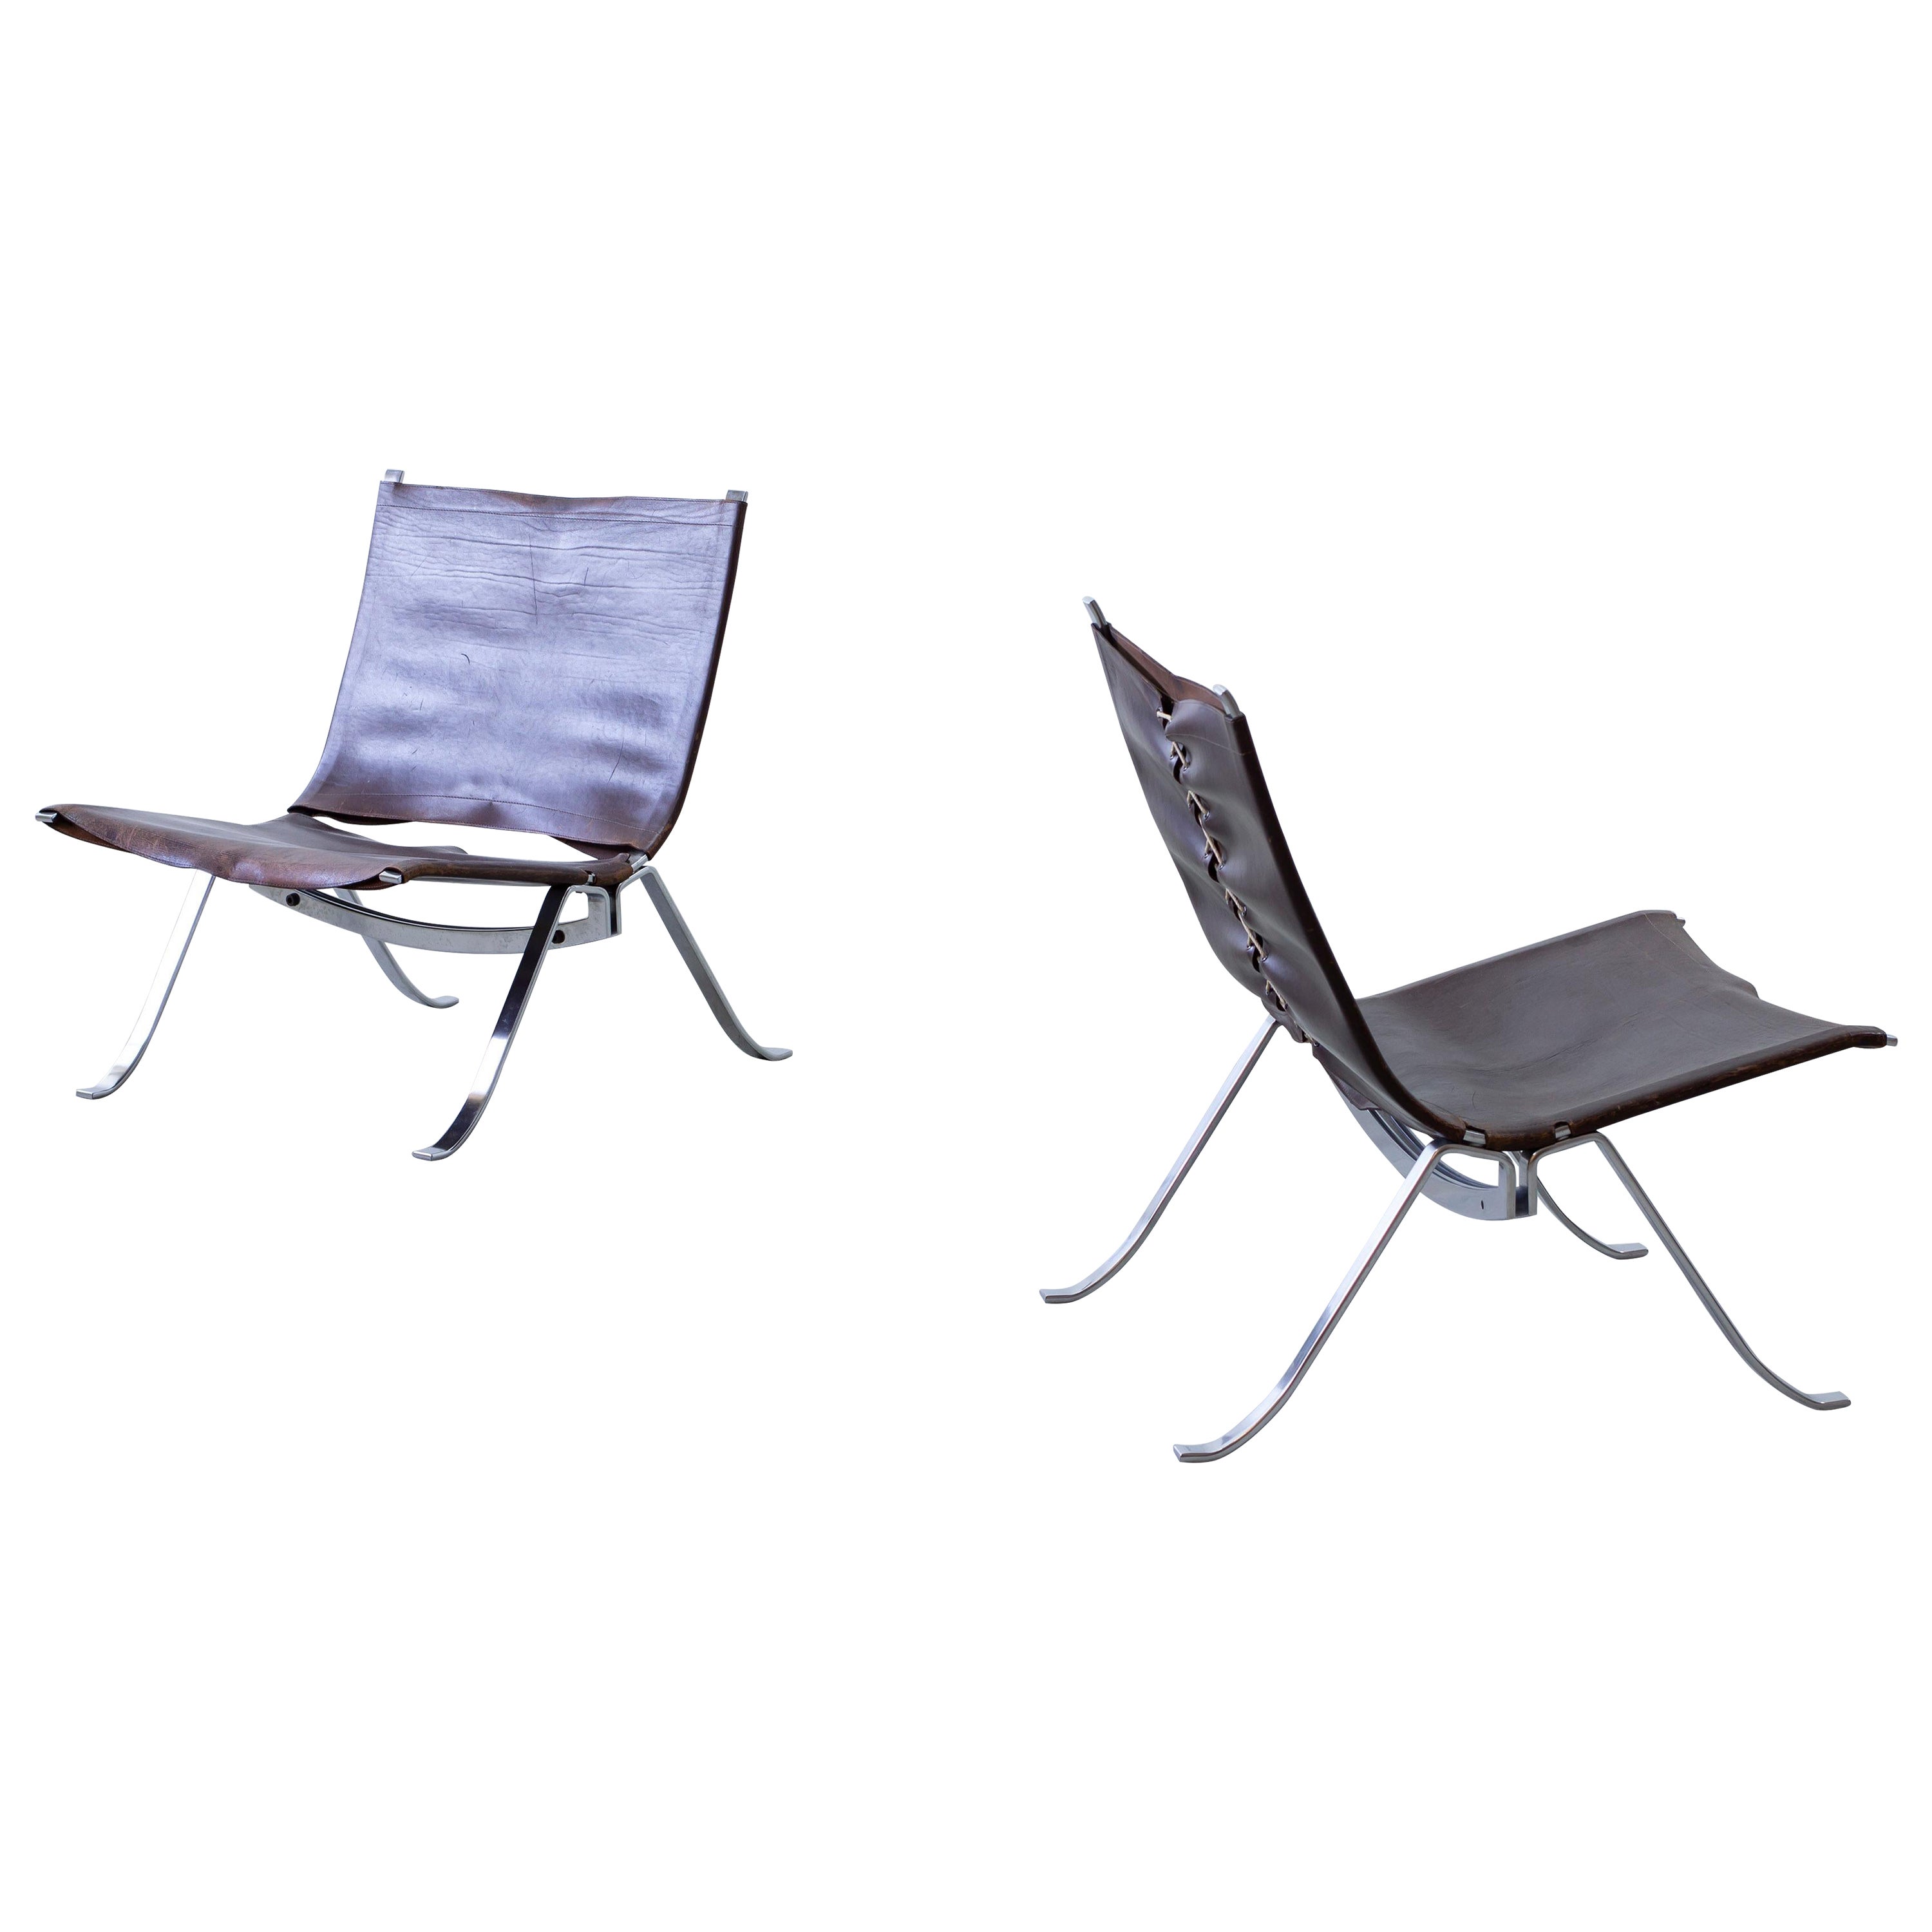 Pair of lounge chairs by Preben Fabricius for Arnold Exclusiv, ca 1972 For Sale